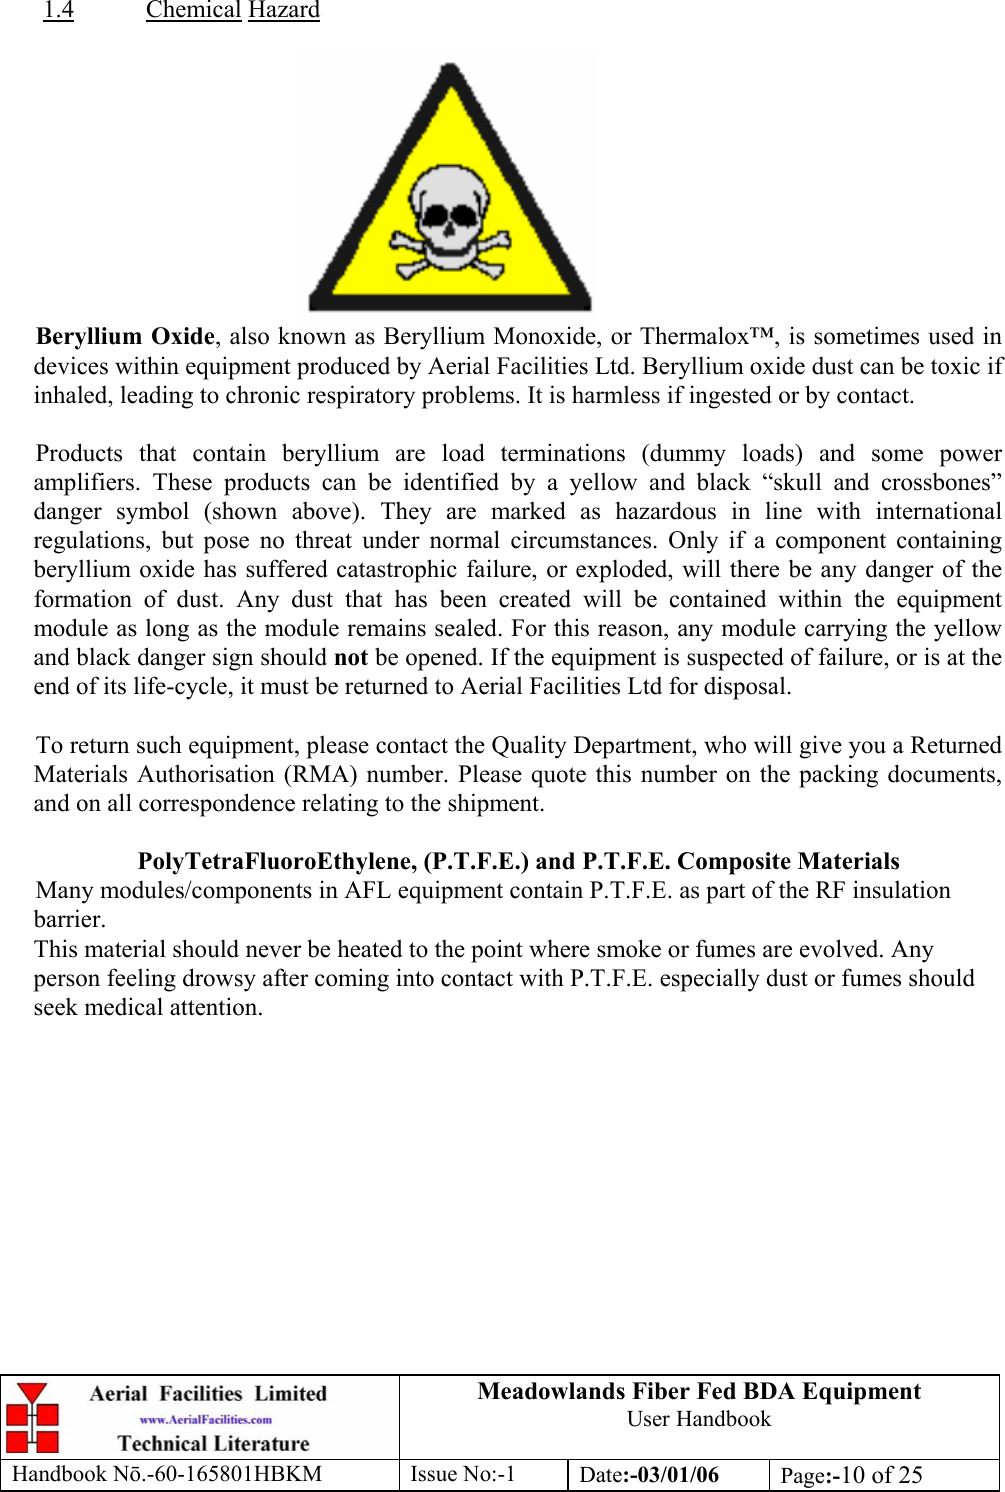  1.4Meadowlands Fiber Fed BDA Equipment User Handbook Handbook Nō.-60-165801HBKM Issue No:-1 Date:-03/01/06  Page:-10 of 25   Chemical Hazard   Beryllium Oxide, also known as Beryllium Monoxide, or Thermalox™, is sometimes used in devices within equipment produced by Aerial Facilities Ltd. Beryllium oxide dust can be toxic if inhaled, leading to chronic respiratory problems. It is harmless if ingested or by contact.  Products that contain beryllium are load terminations (dummy loads) and some power amplifiers. These products can be identified by a yellow and black “skull and crossbones” danger symbol (shown above). They are marked as hazardous in line with international regulations, but pose no threat under normal circumstances. Only if a component containing beryllium oxide has suffered catastrophic failure, or exploded, will there be any danger of the formation of dust. Any dust that has been created will be contained within the equipment module as long as the module remains sealed. For this reason, any module carrying the yellow and black danger sign should not be opened. If the equipment is suspected of failure, or is at the end of its life-cycle, it must be returned to Aerial Facilities Ltd for disposal.  To return such equipment, please contact the Quality Department, who will give you a Returned Materials Authorisation (RMA) number. Please quote this number on the packing documents, and on all correspondence relating to the shipment.  PolyTetraFluoroEthylene, (P.T.F.E.) and P.T.F.E. Composite Materials Many modules/components in AFL equipment contain P.T.F.E. as part of the RF insulation barrier. This material should never be heated to the point where smoke or fumes are evolved. Any person feeling drowsy after coming into contact with P.T.F.E. especially dust or fumes should seek medical attention. 